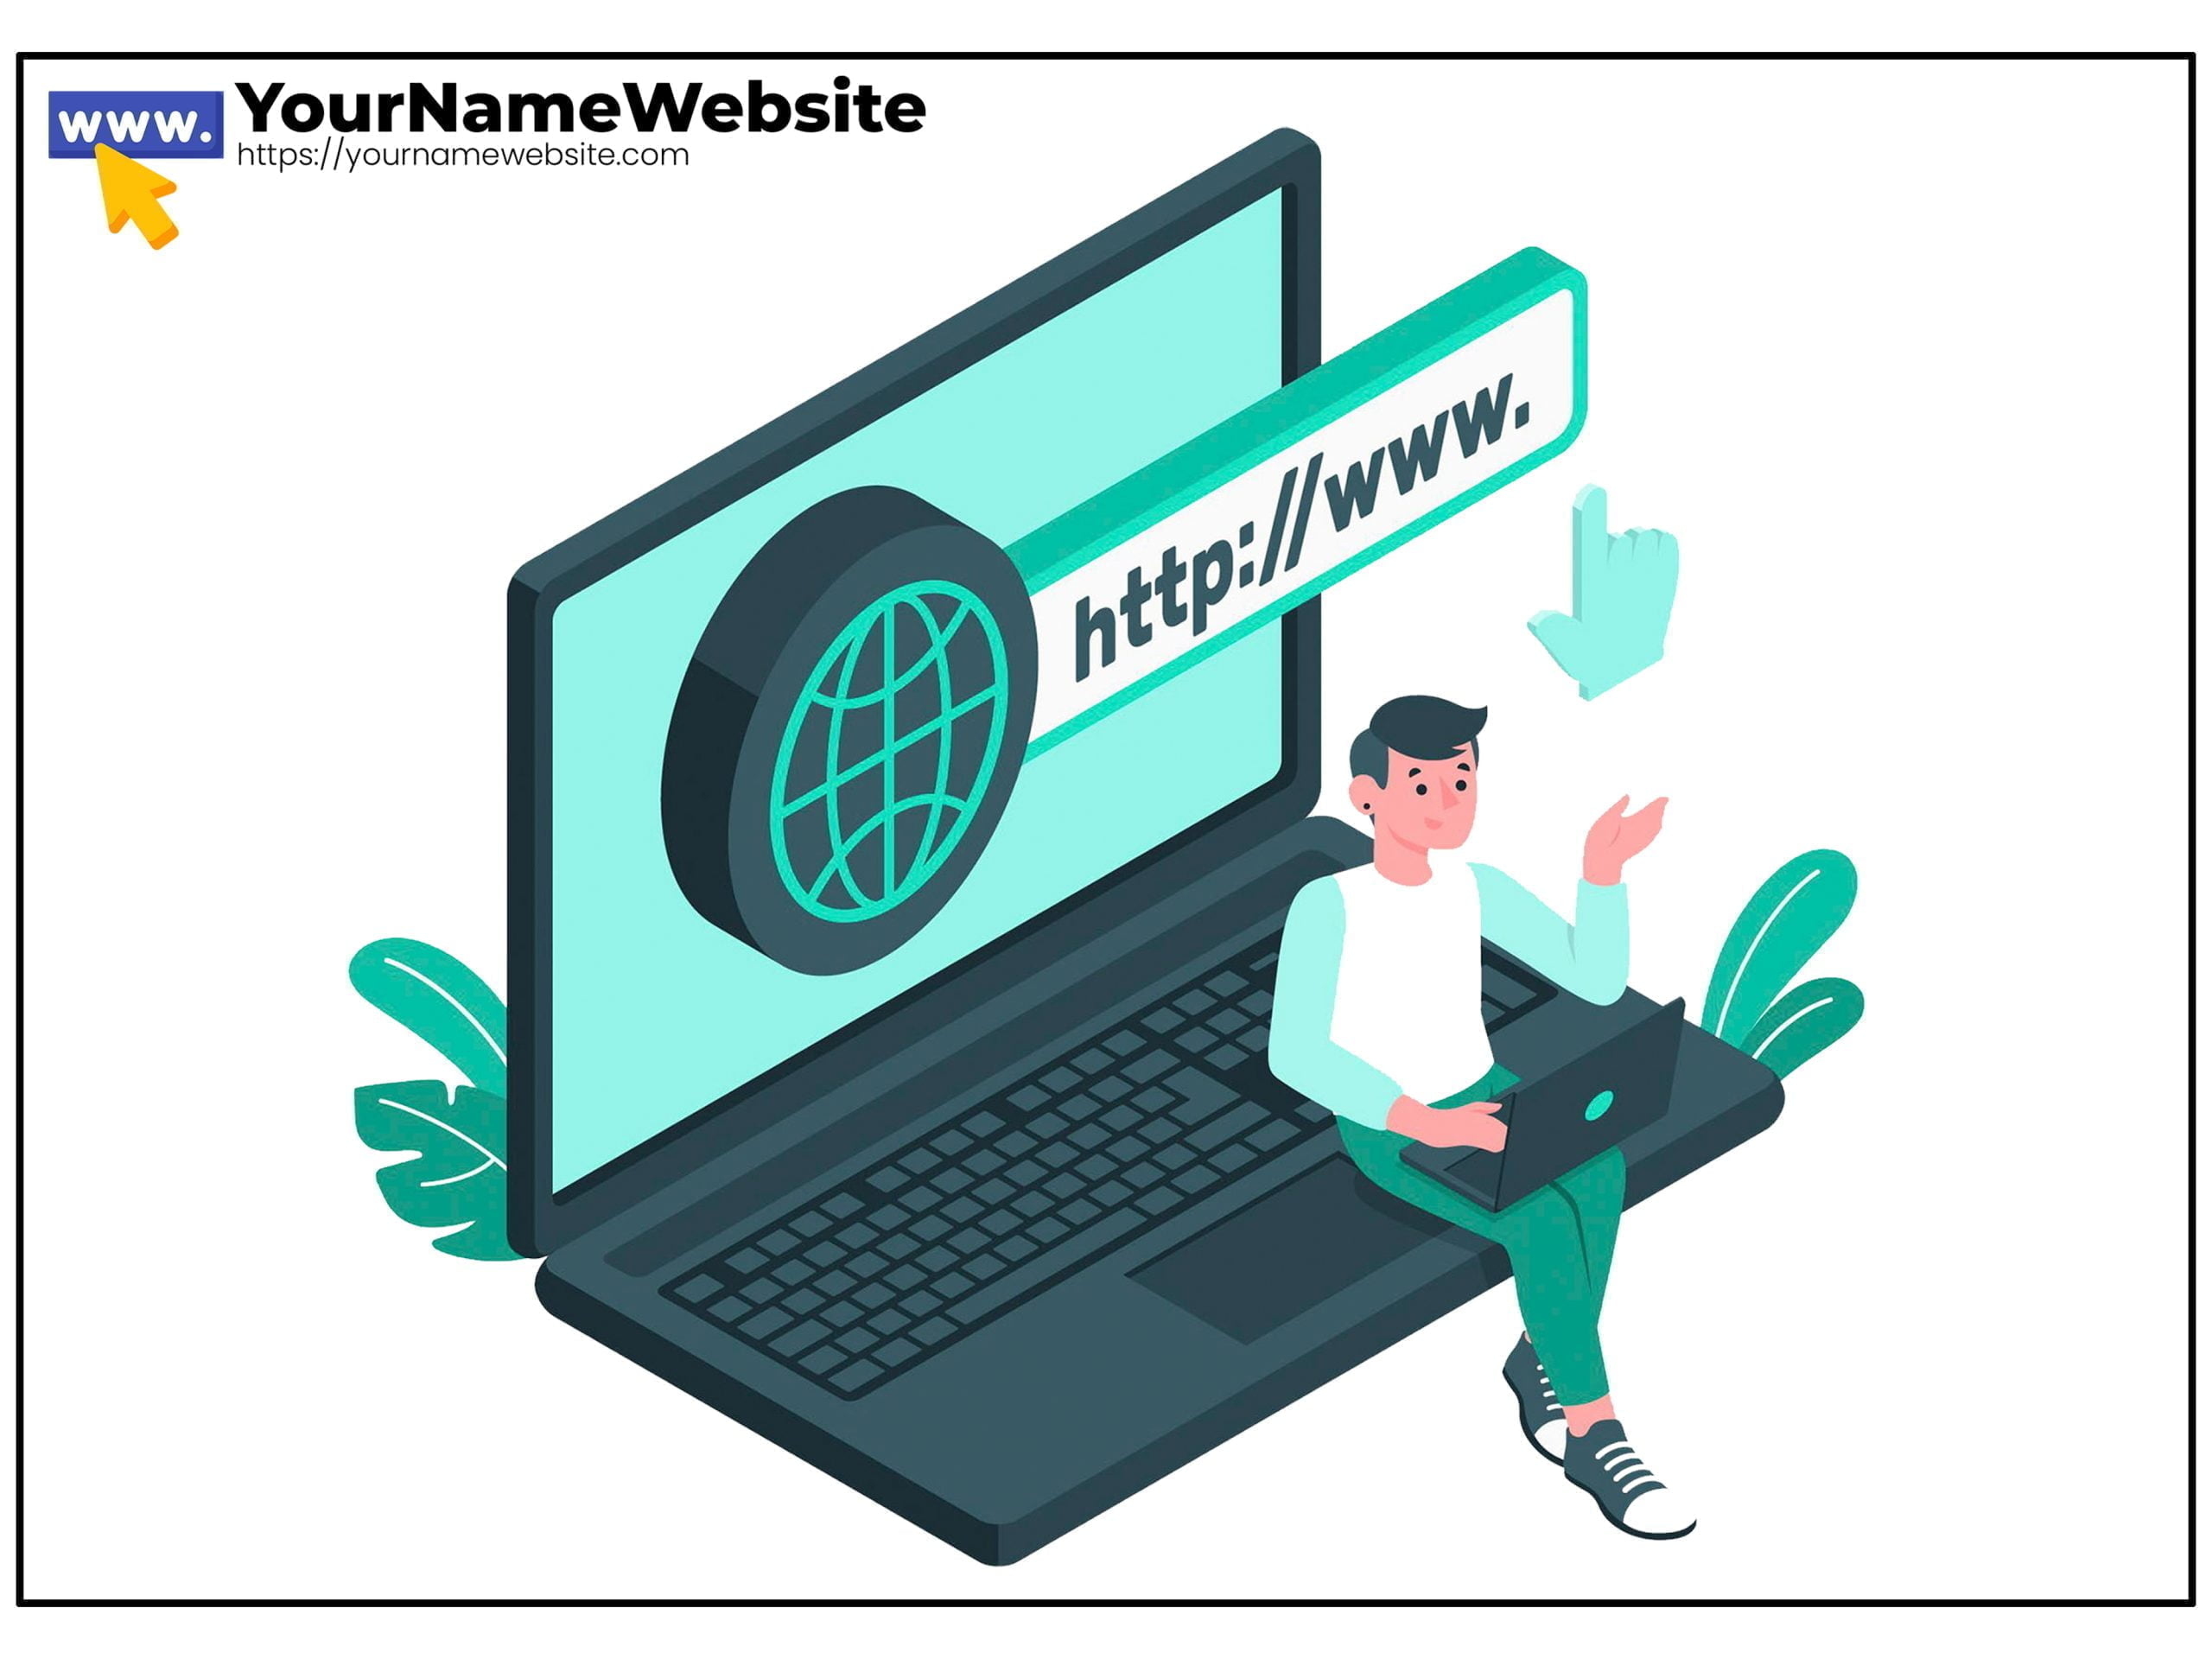 How to Search Domain Name Availability - YOURNAMEWEBSITE.COM